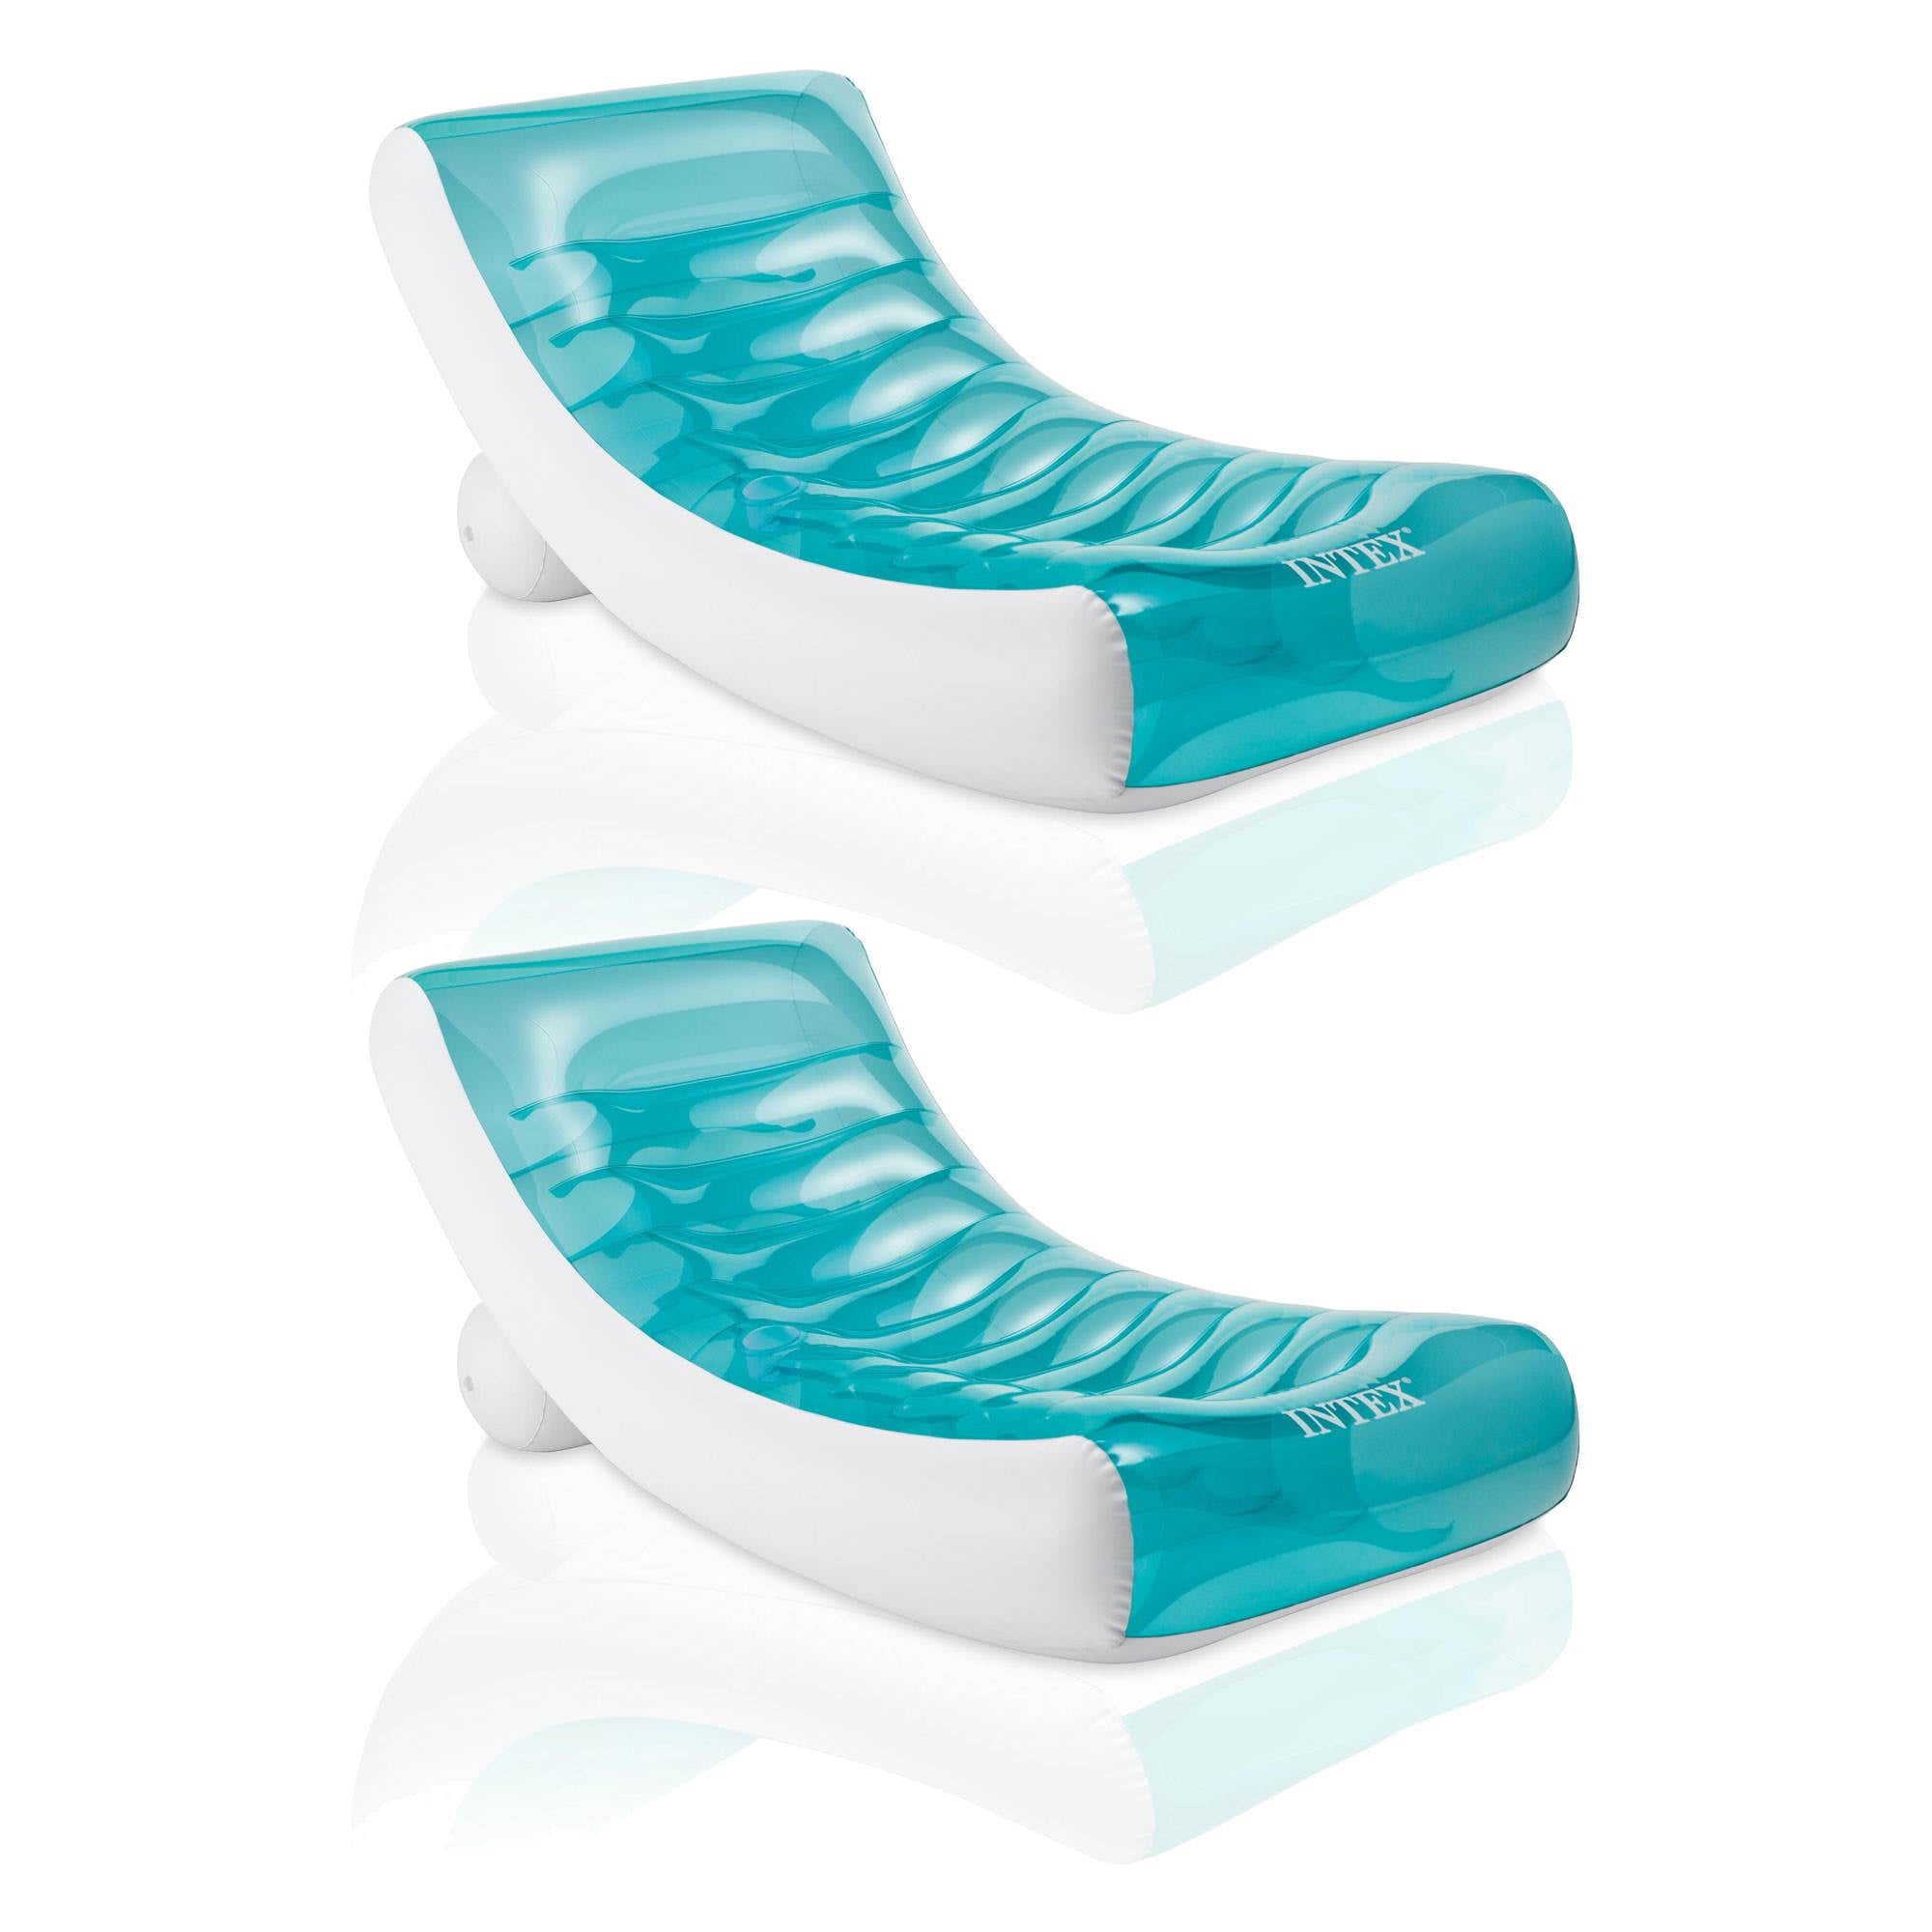 Intex Inflatable Rockin' Lounge Pool Floating Raft Chair with Cupholder